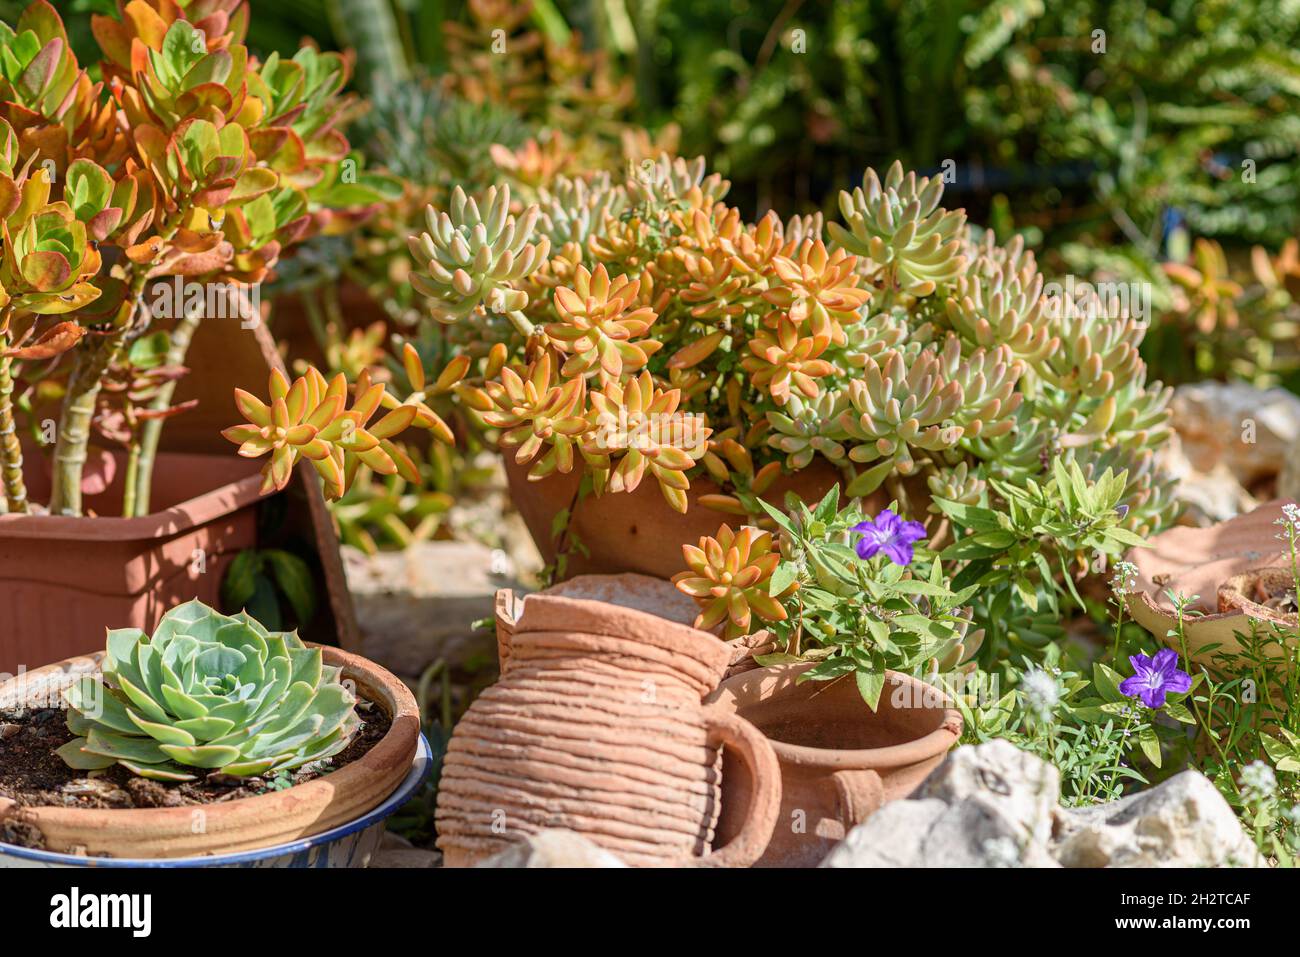 Variety Of Succulents In Garden Of Sunny Day. Close Up Of Succulent Plants In Ceramic Flower Pots. Stock Photo